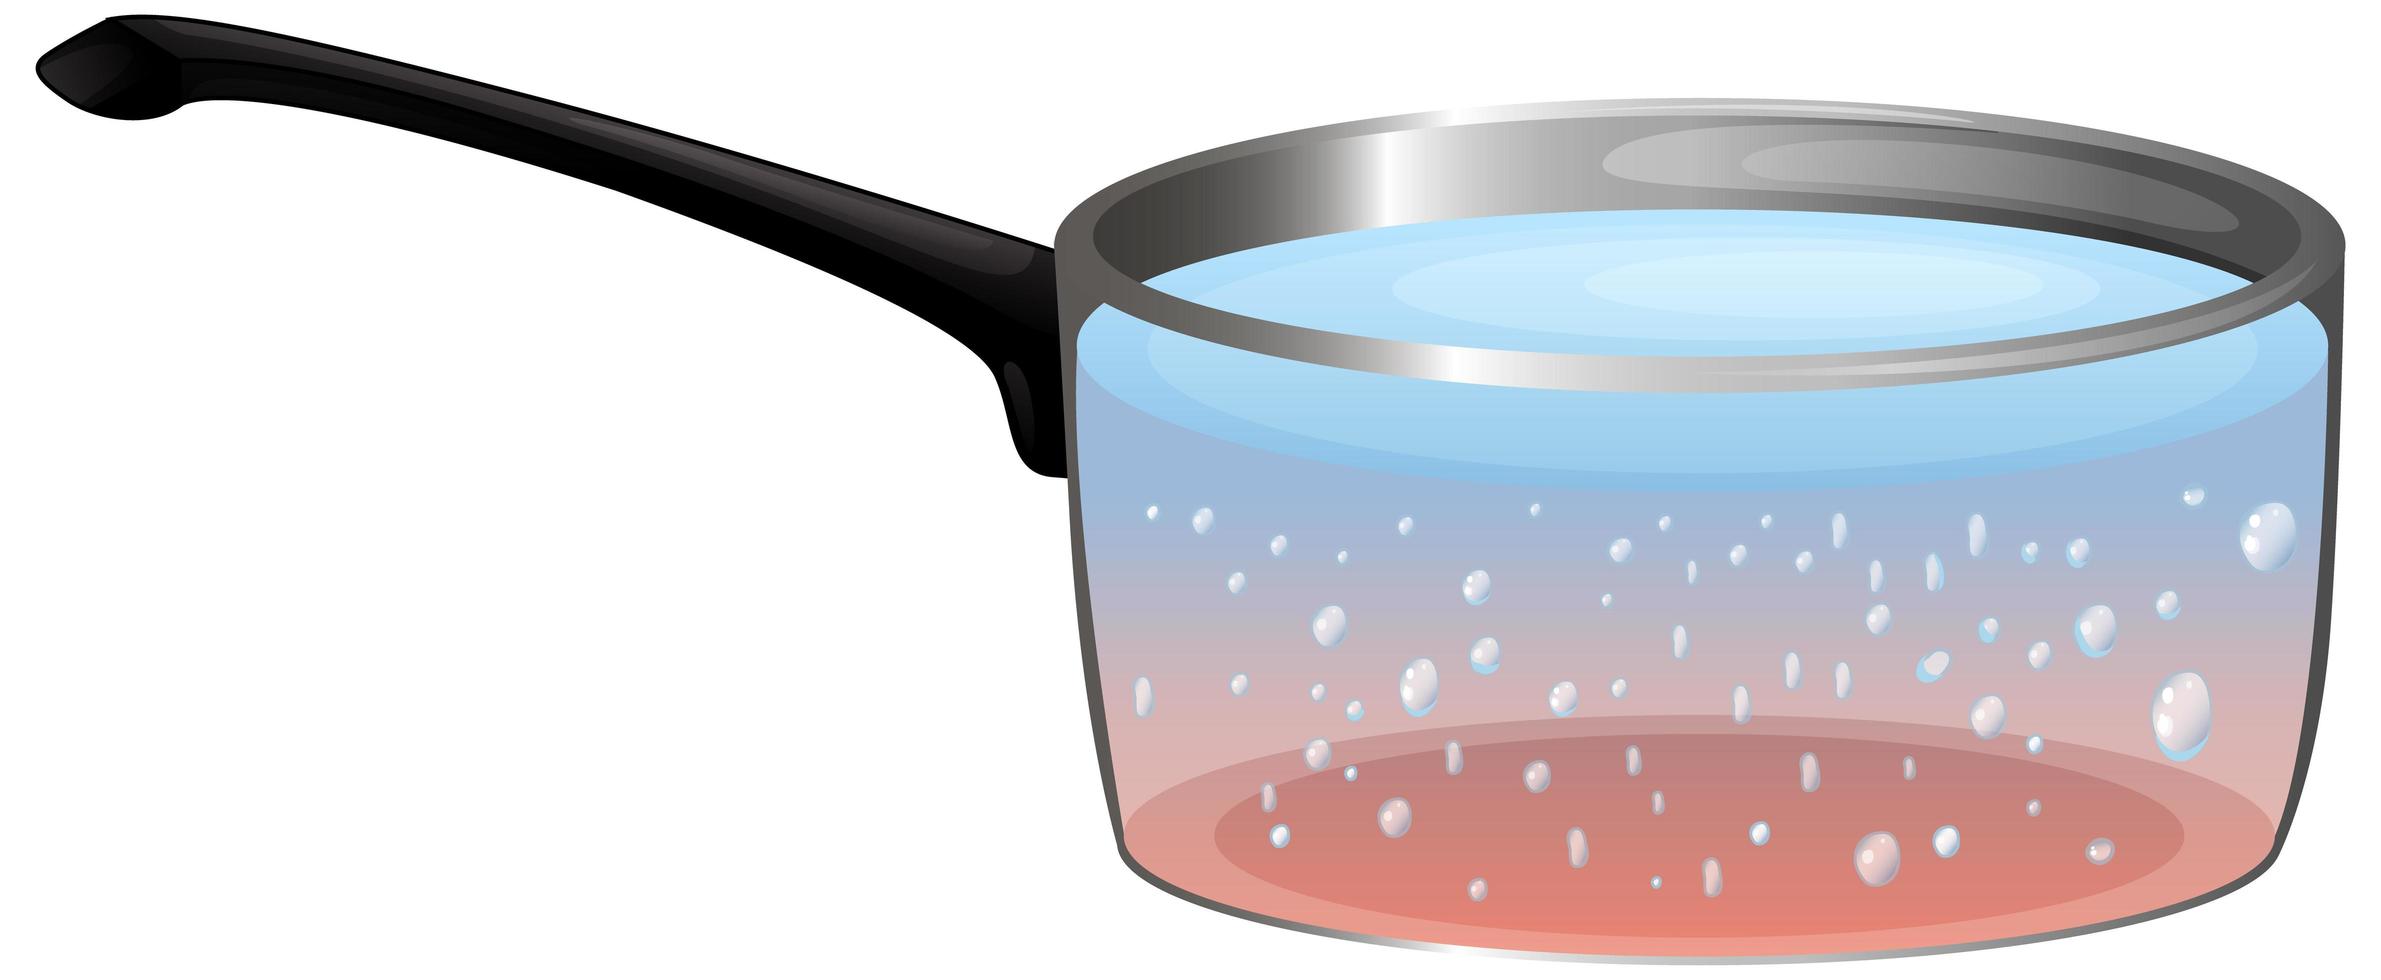 Boiling water in the pot vector